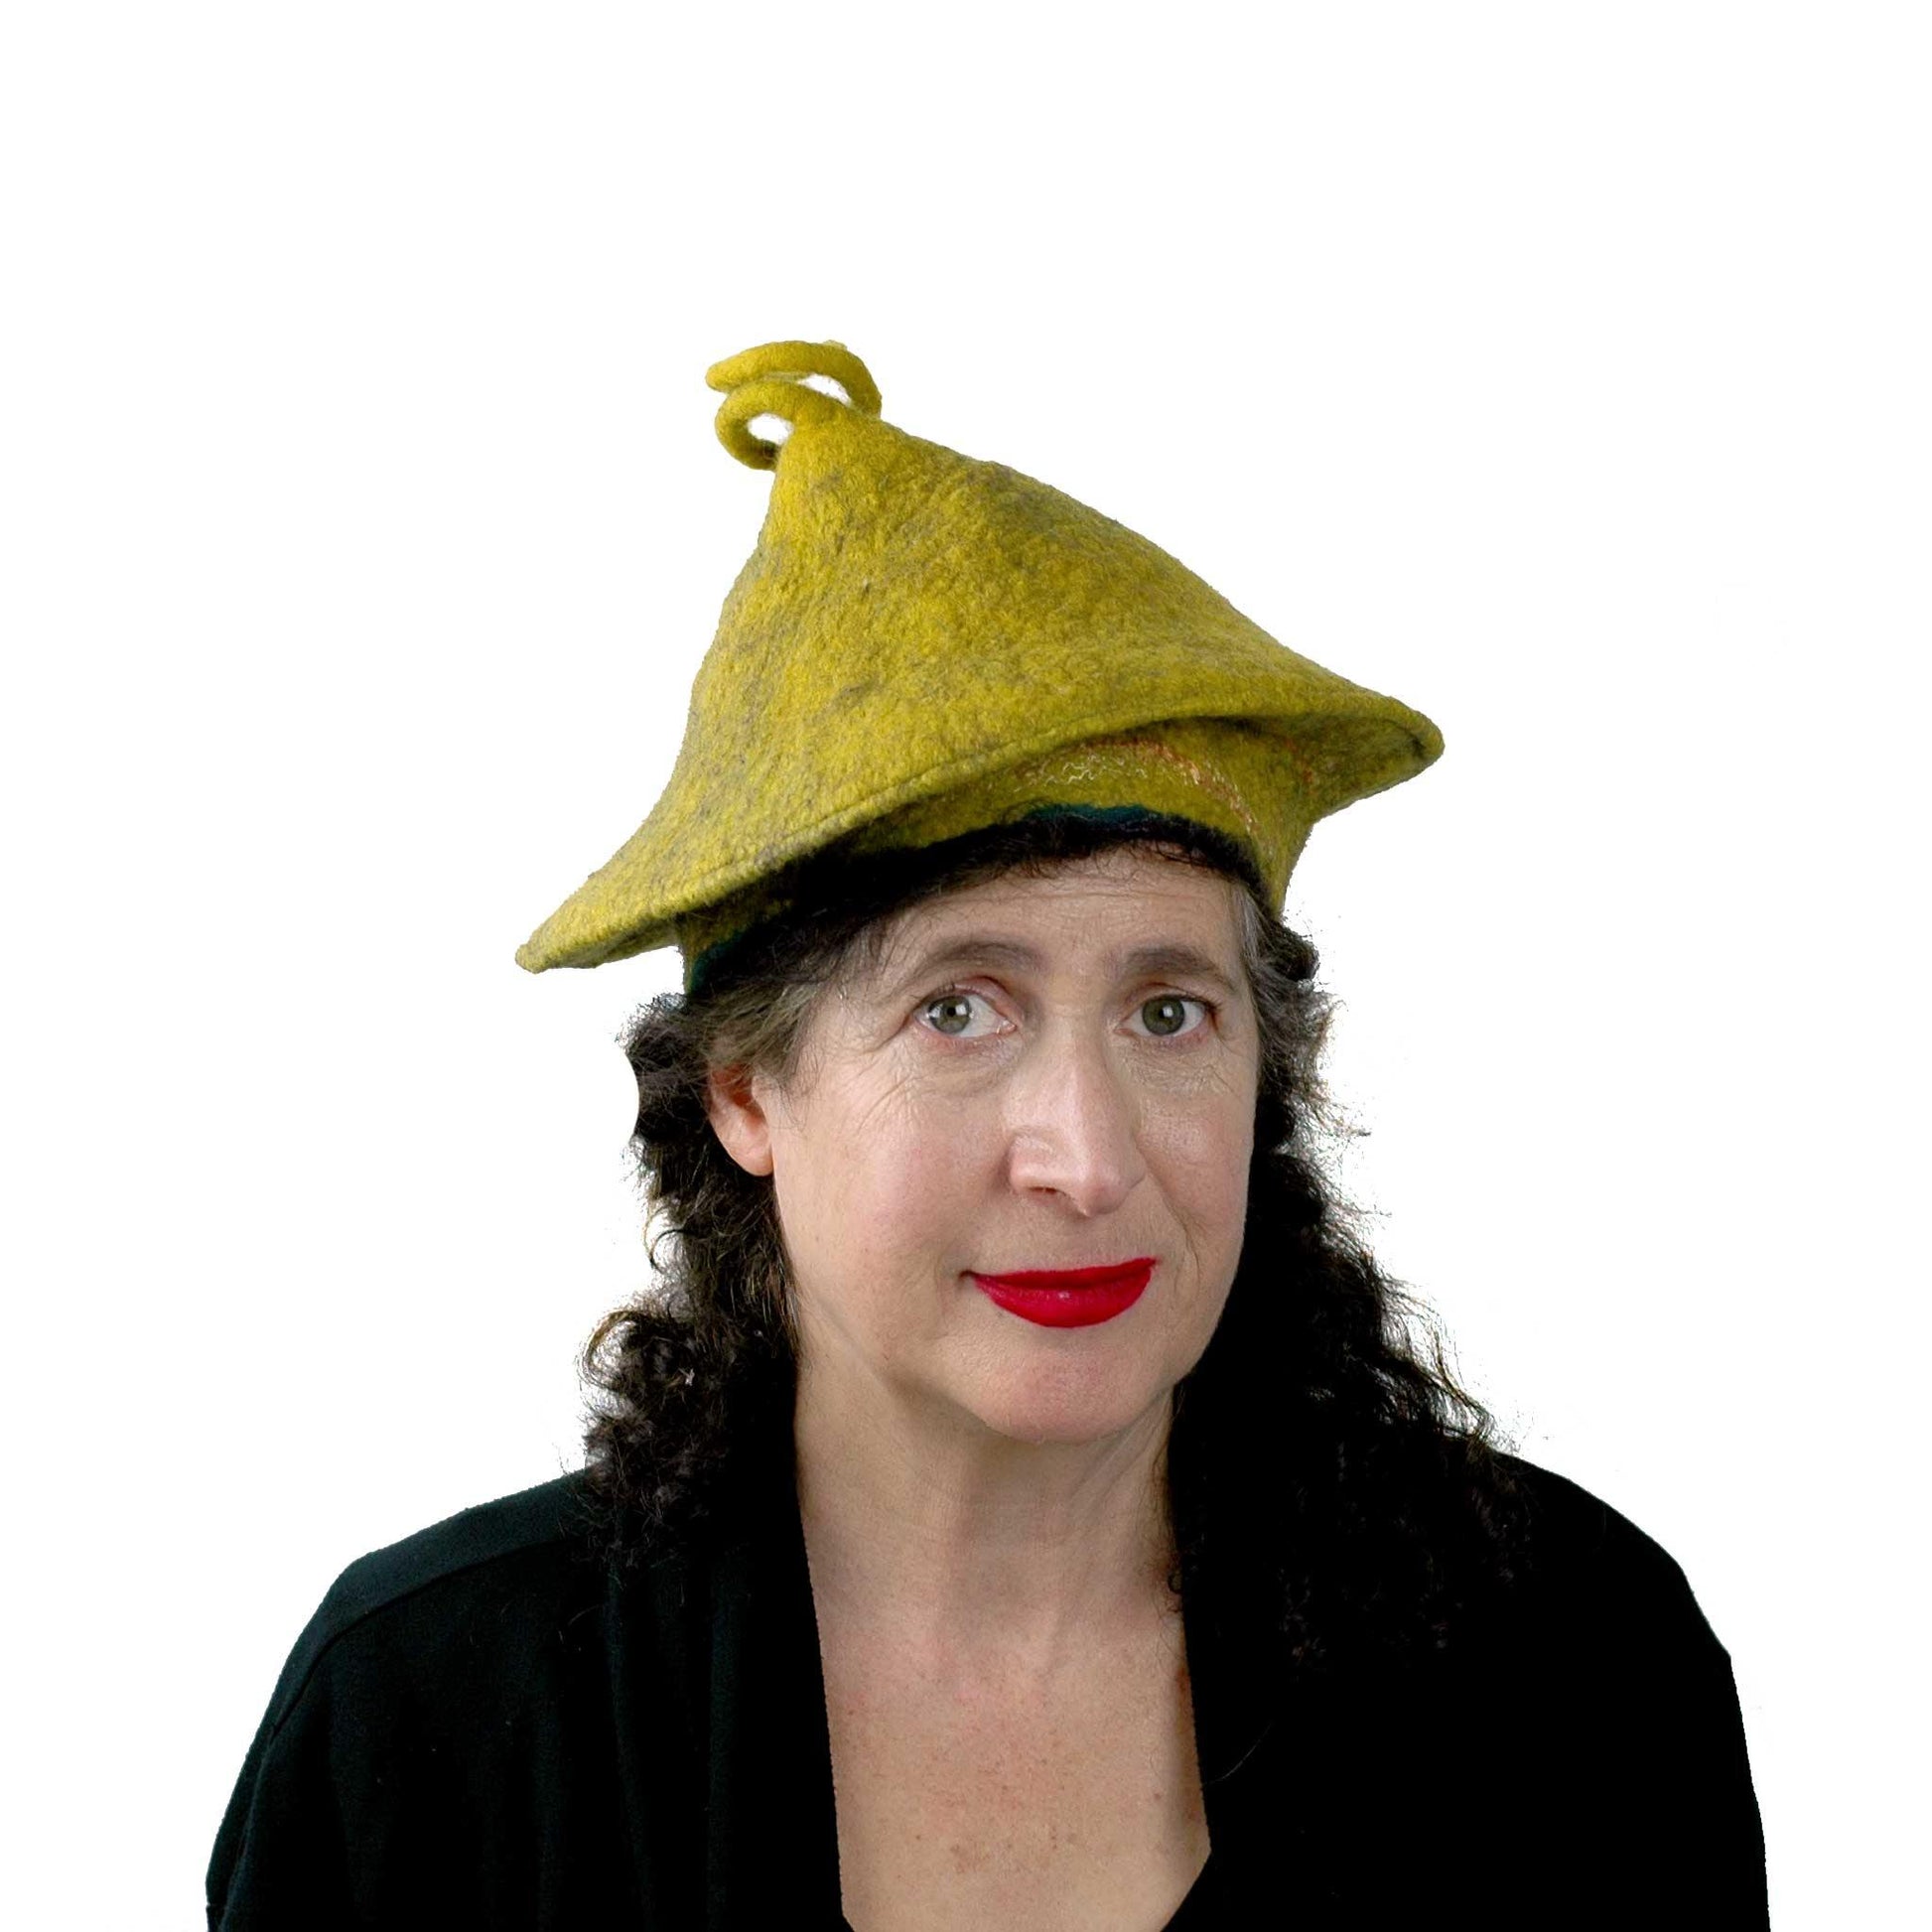 Conical Hat in Mustard Yellow - Medium Small Size  - front view